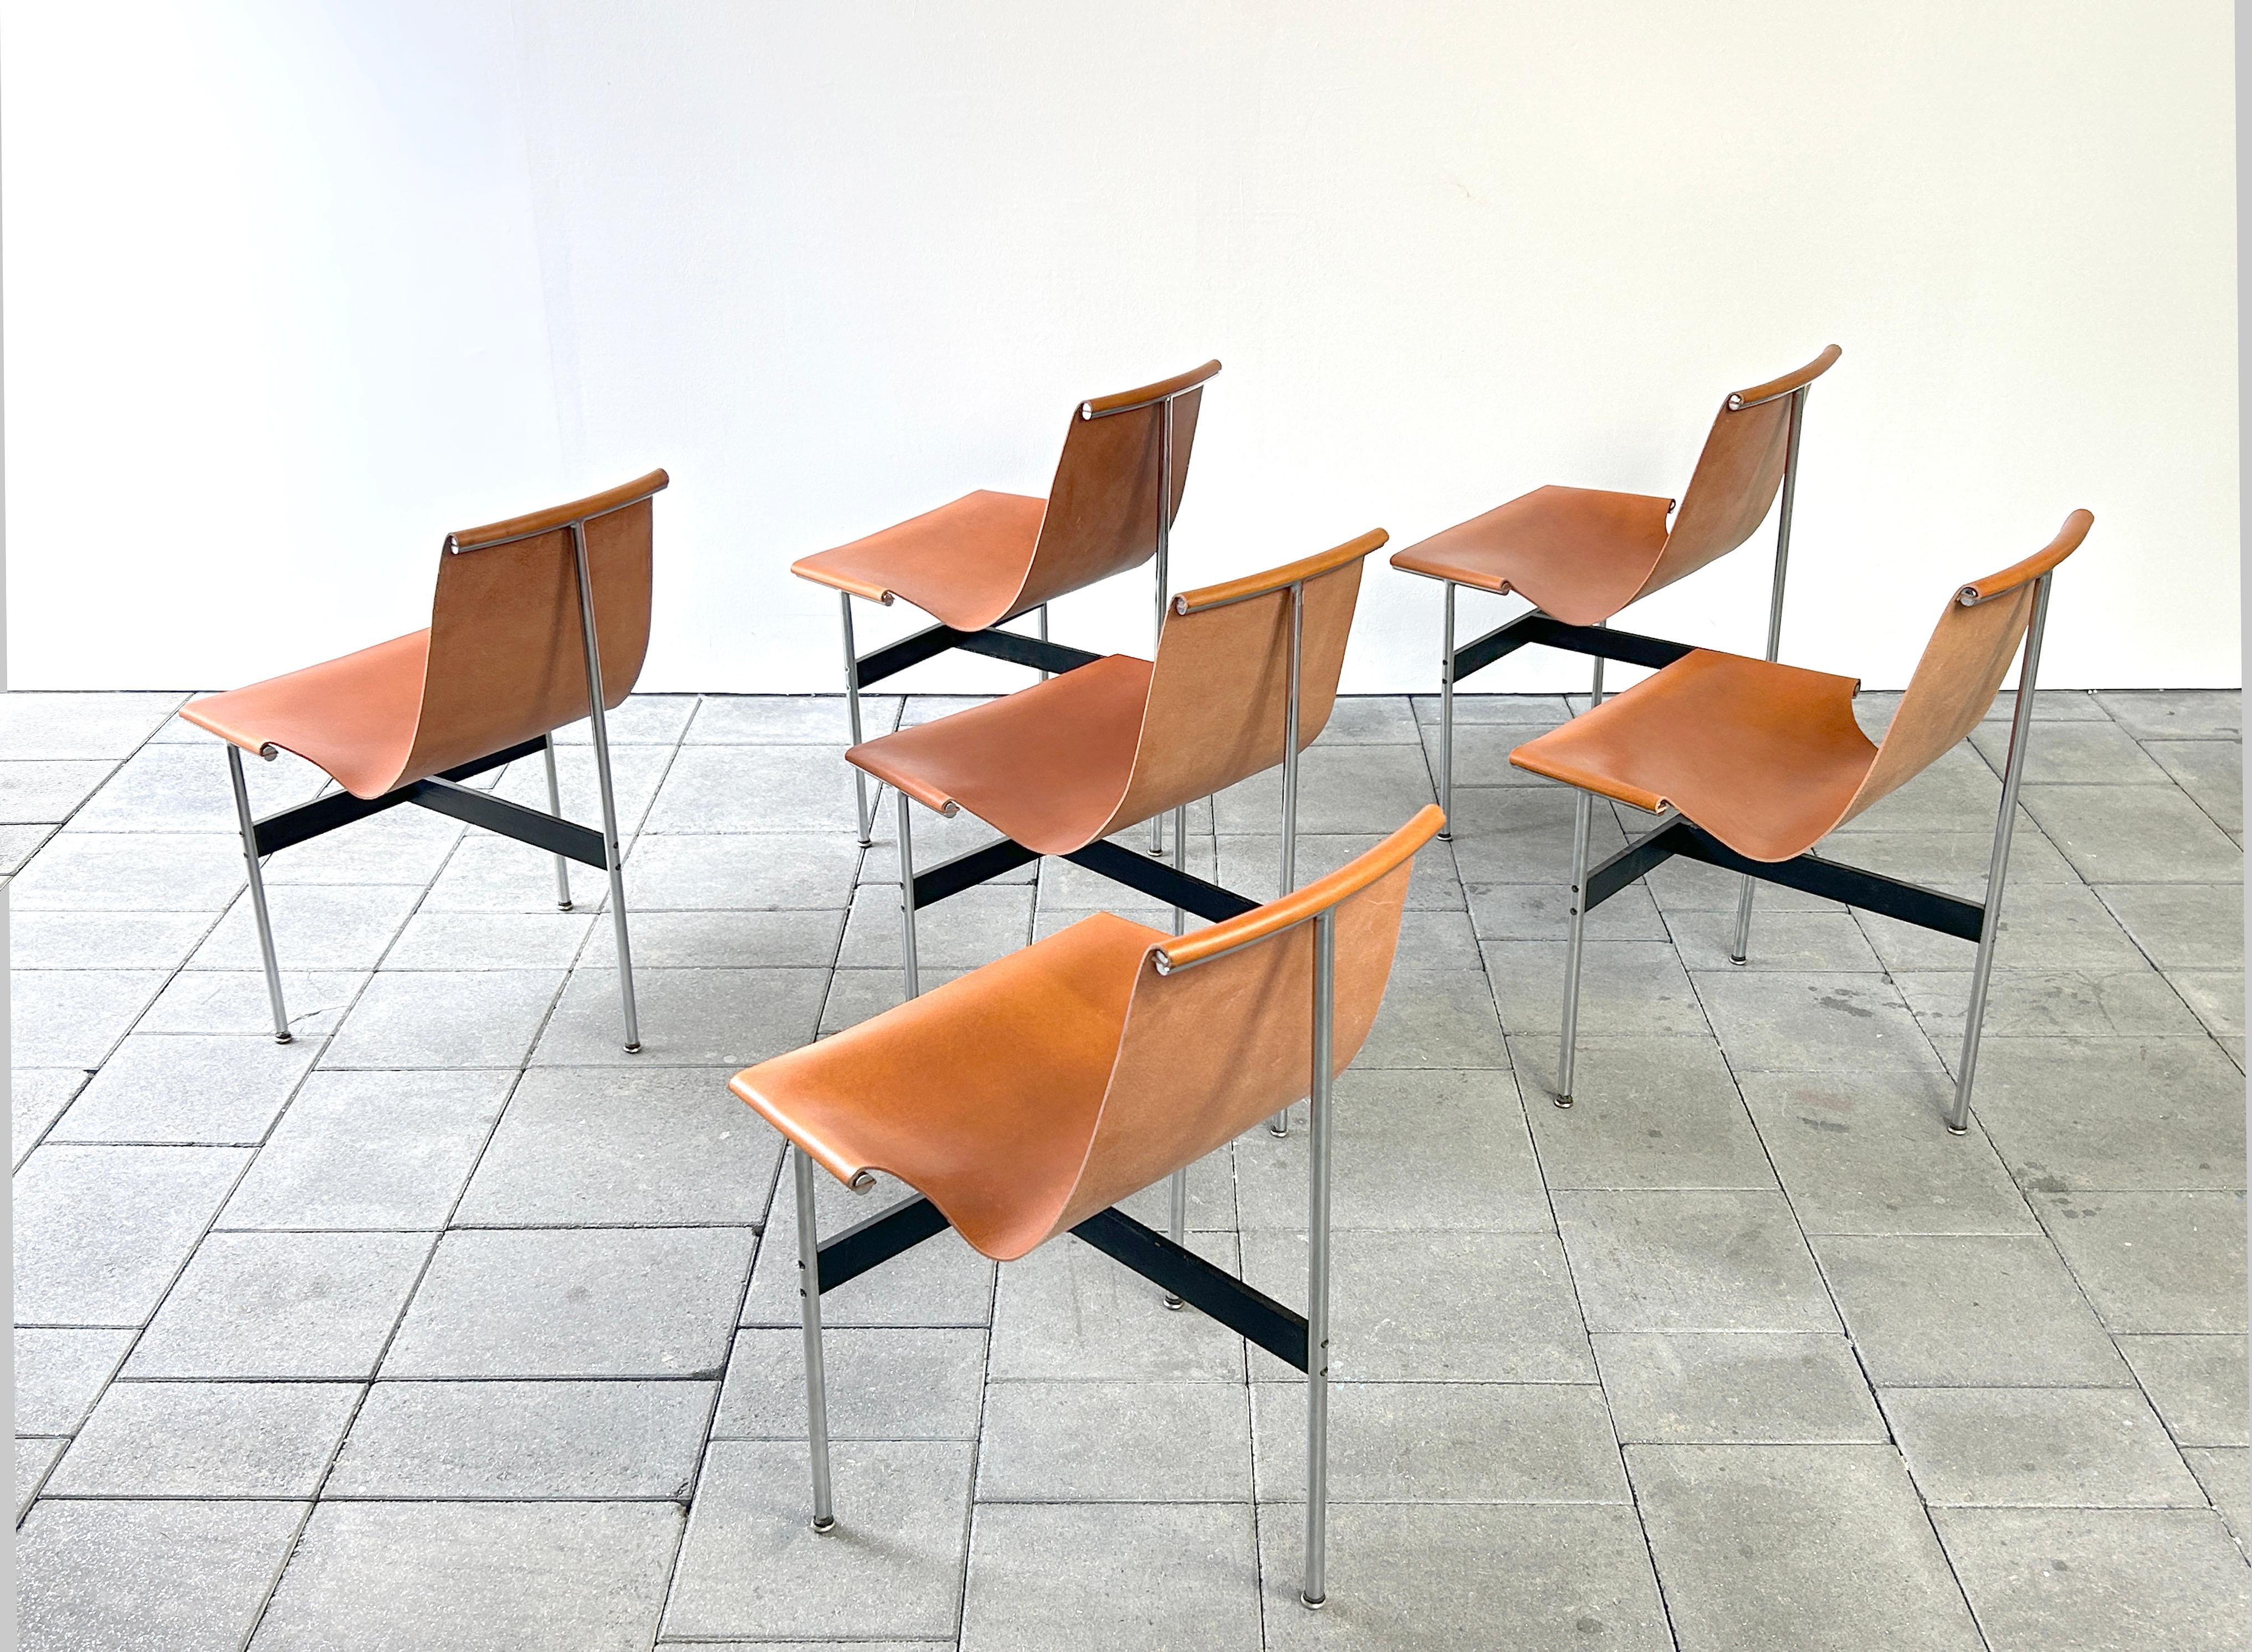 Set of 6 T-chairs designed by Katavolos Litell & Kelley in 1952 For Sale 1